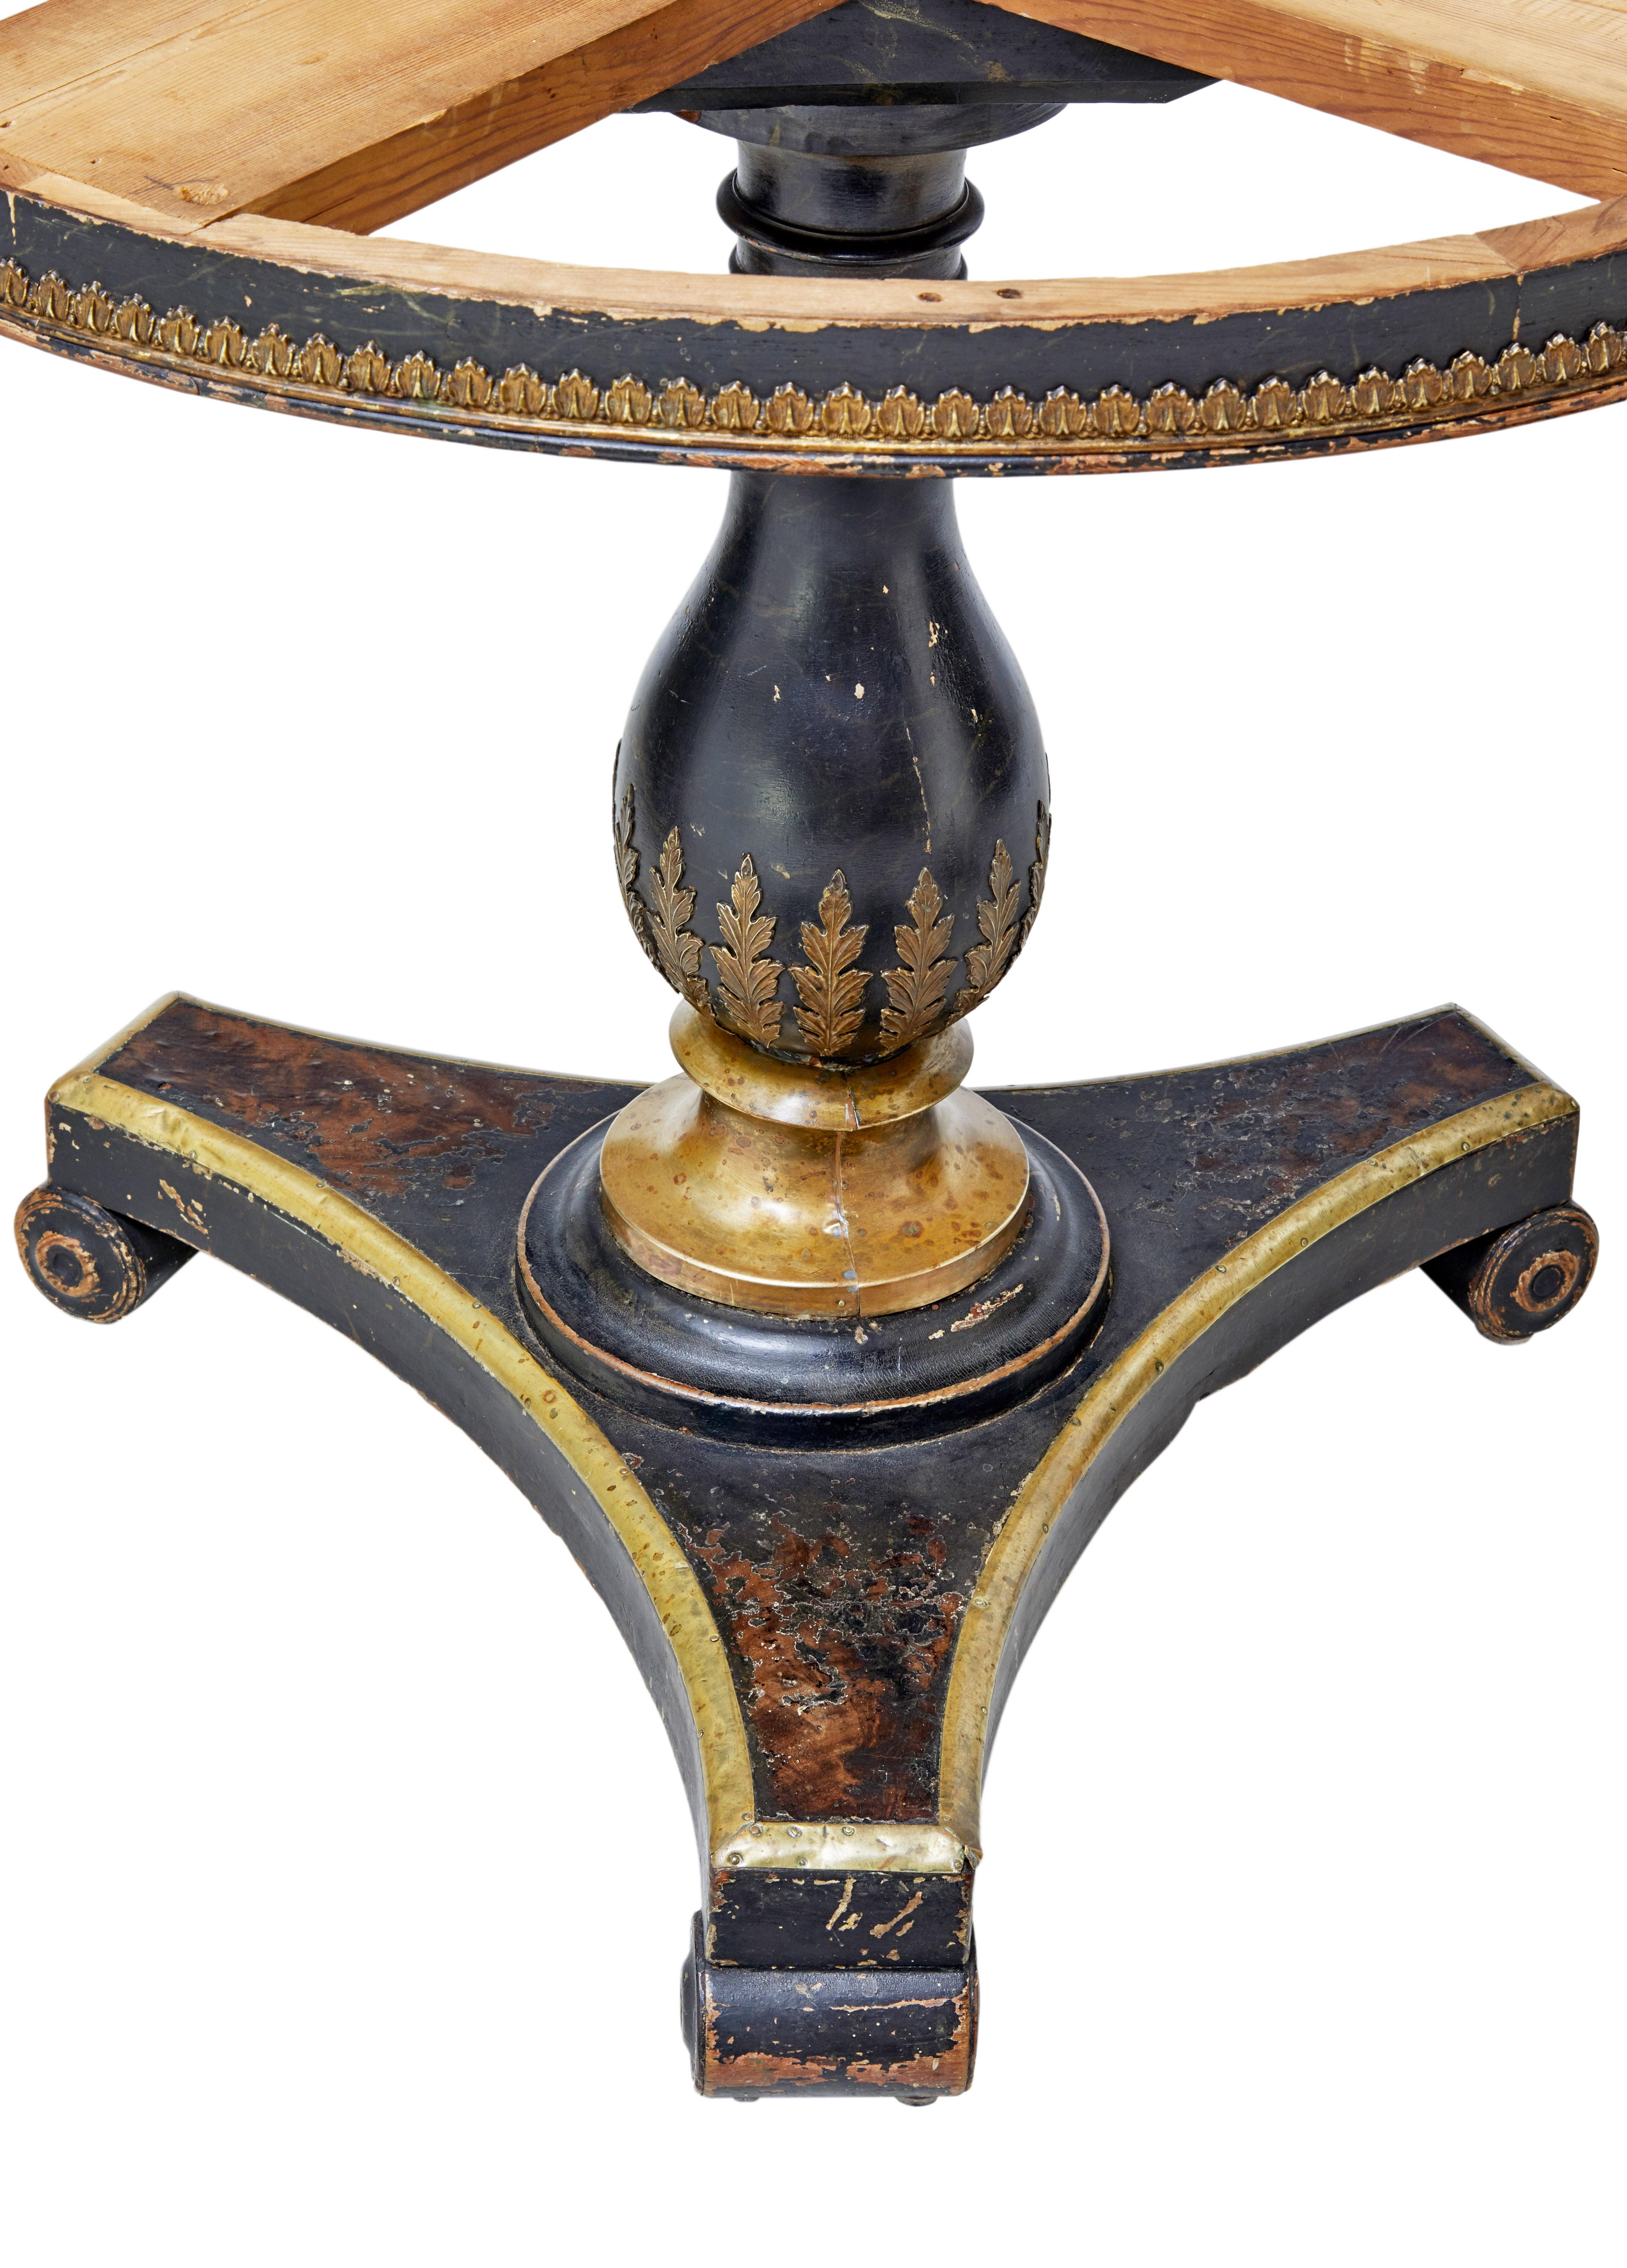 Rare marble top center table, circa 1820.

A mahogany center table very much in the taste of Brighton pavilion. With later 19th century ebonized brass decoration to the stem and base. Standing on scrolled feet.

Original bull nose marble top